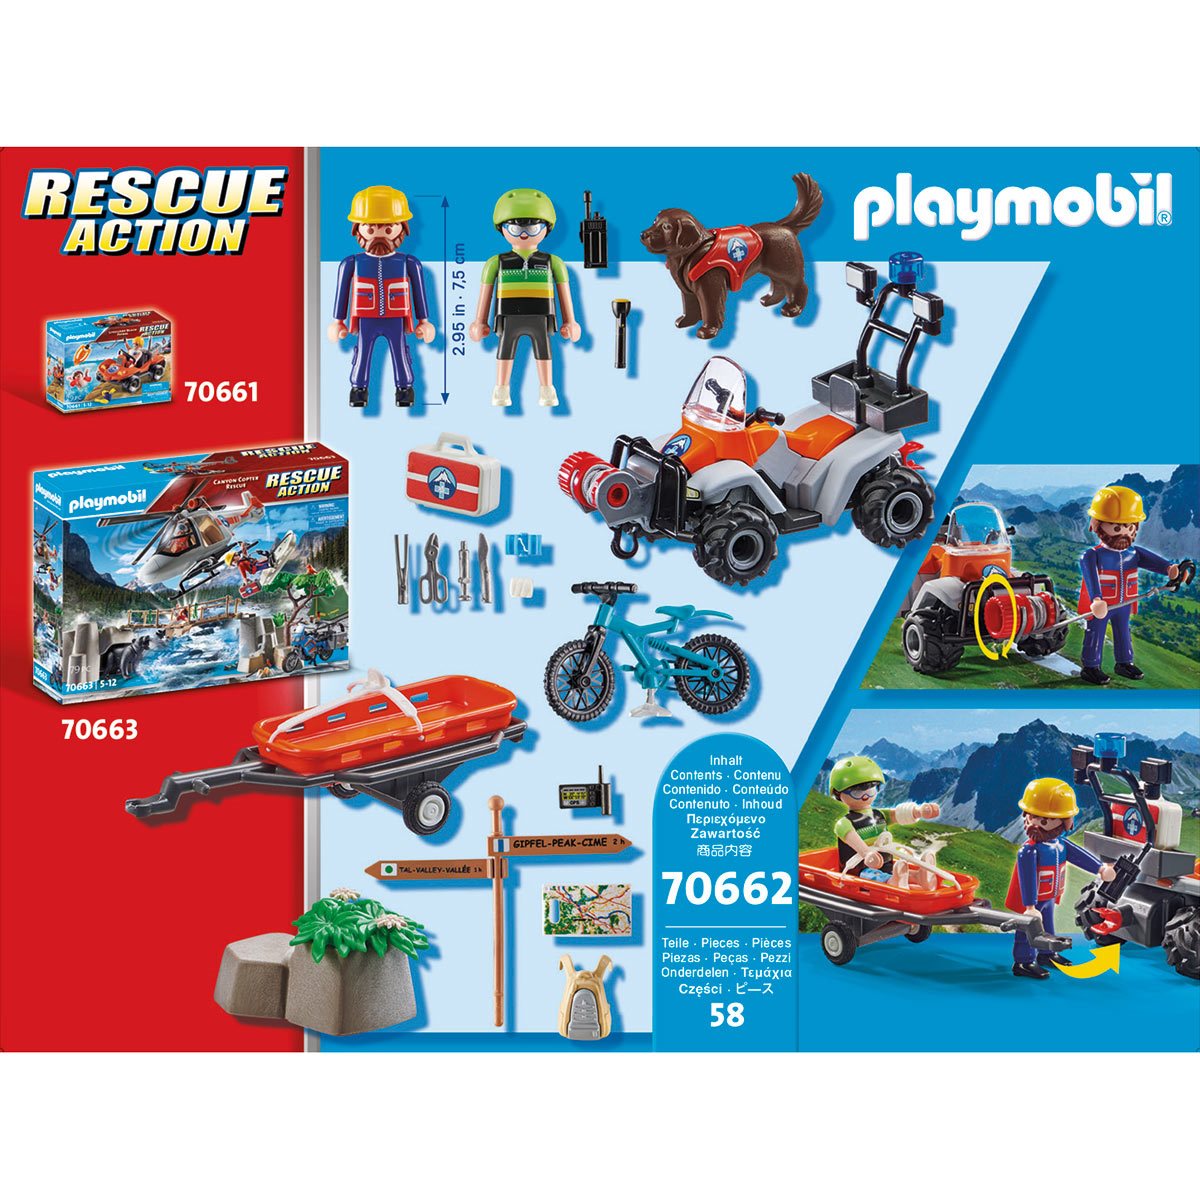 Playmobil rescue action 70663 - Playmobil